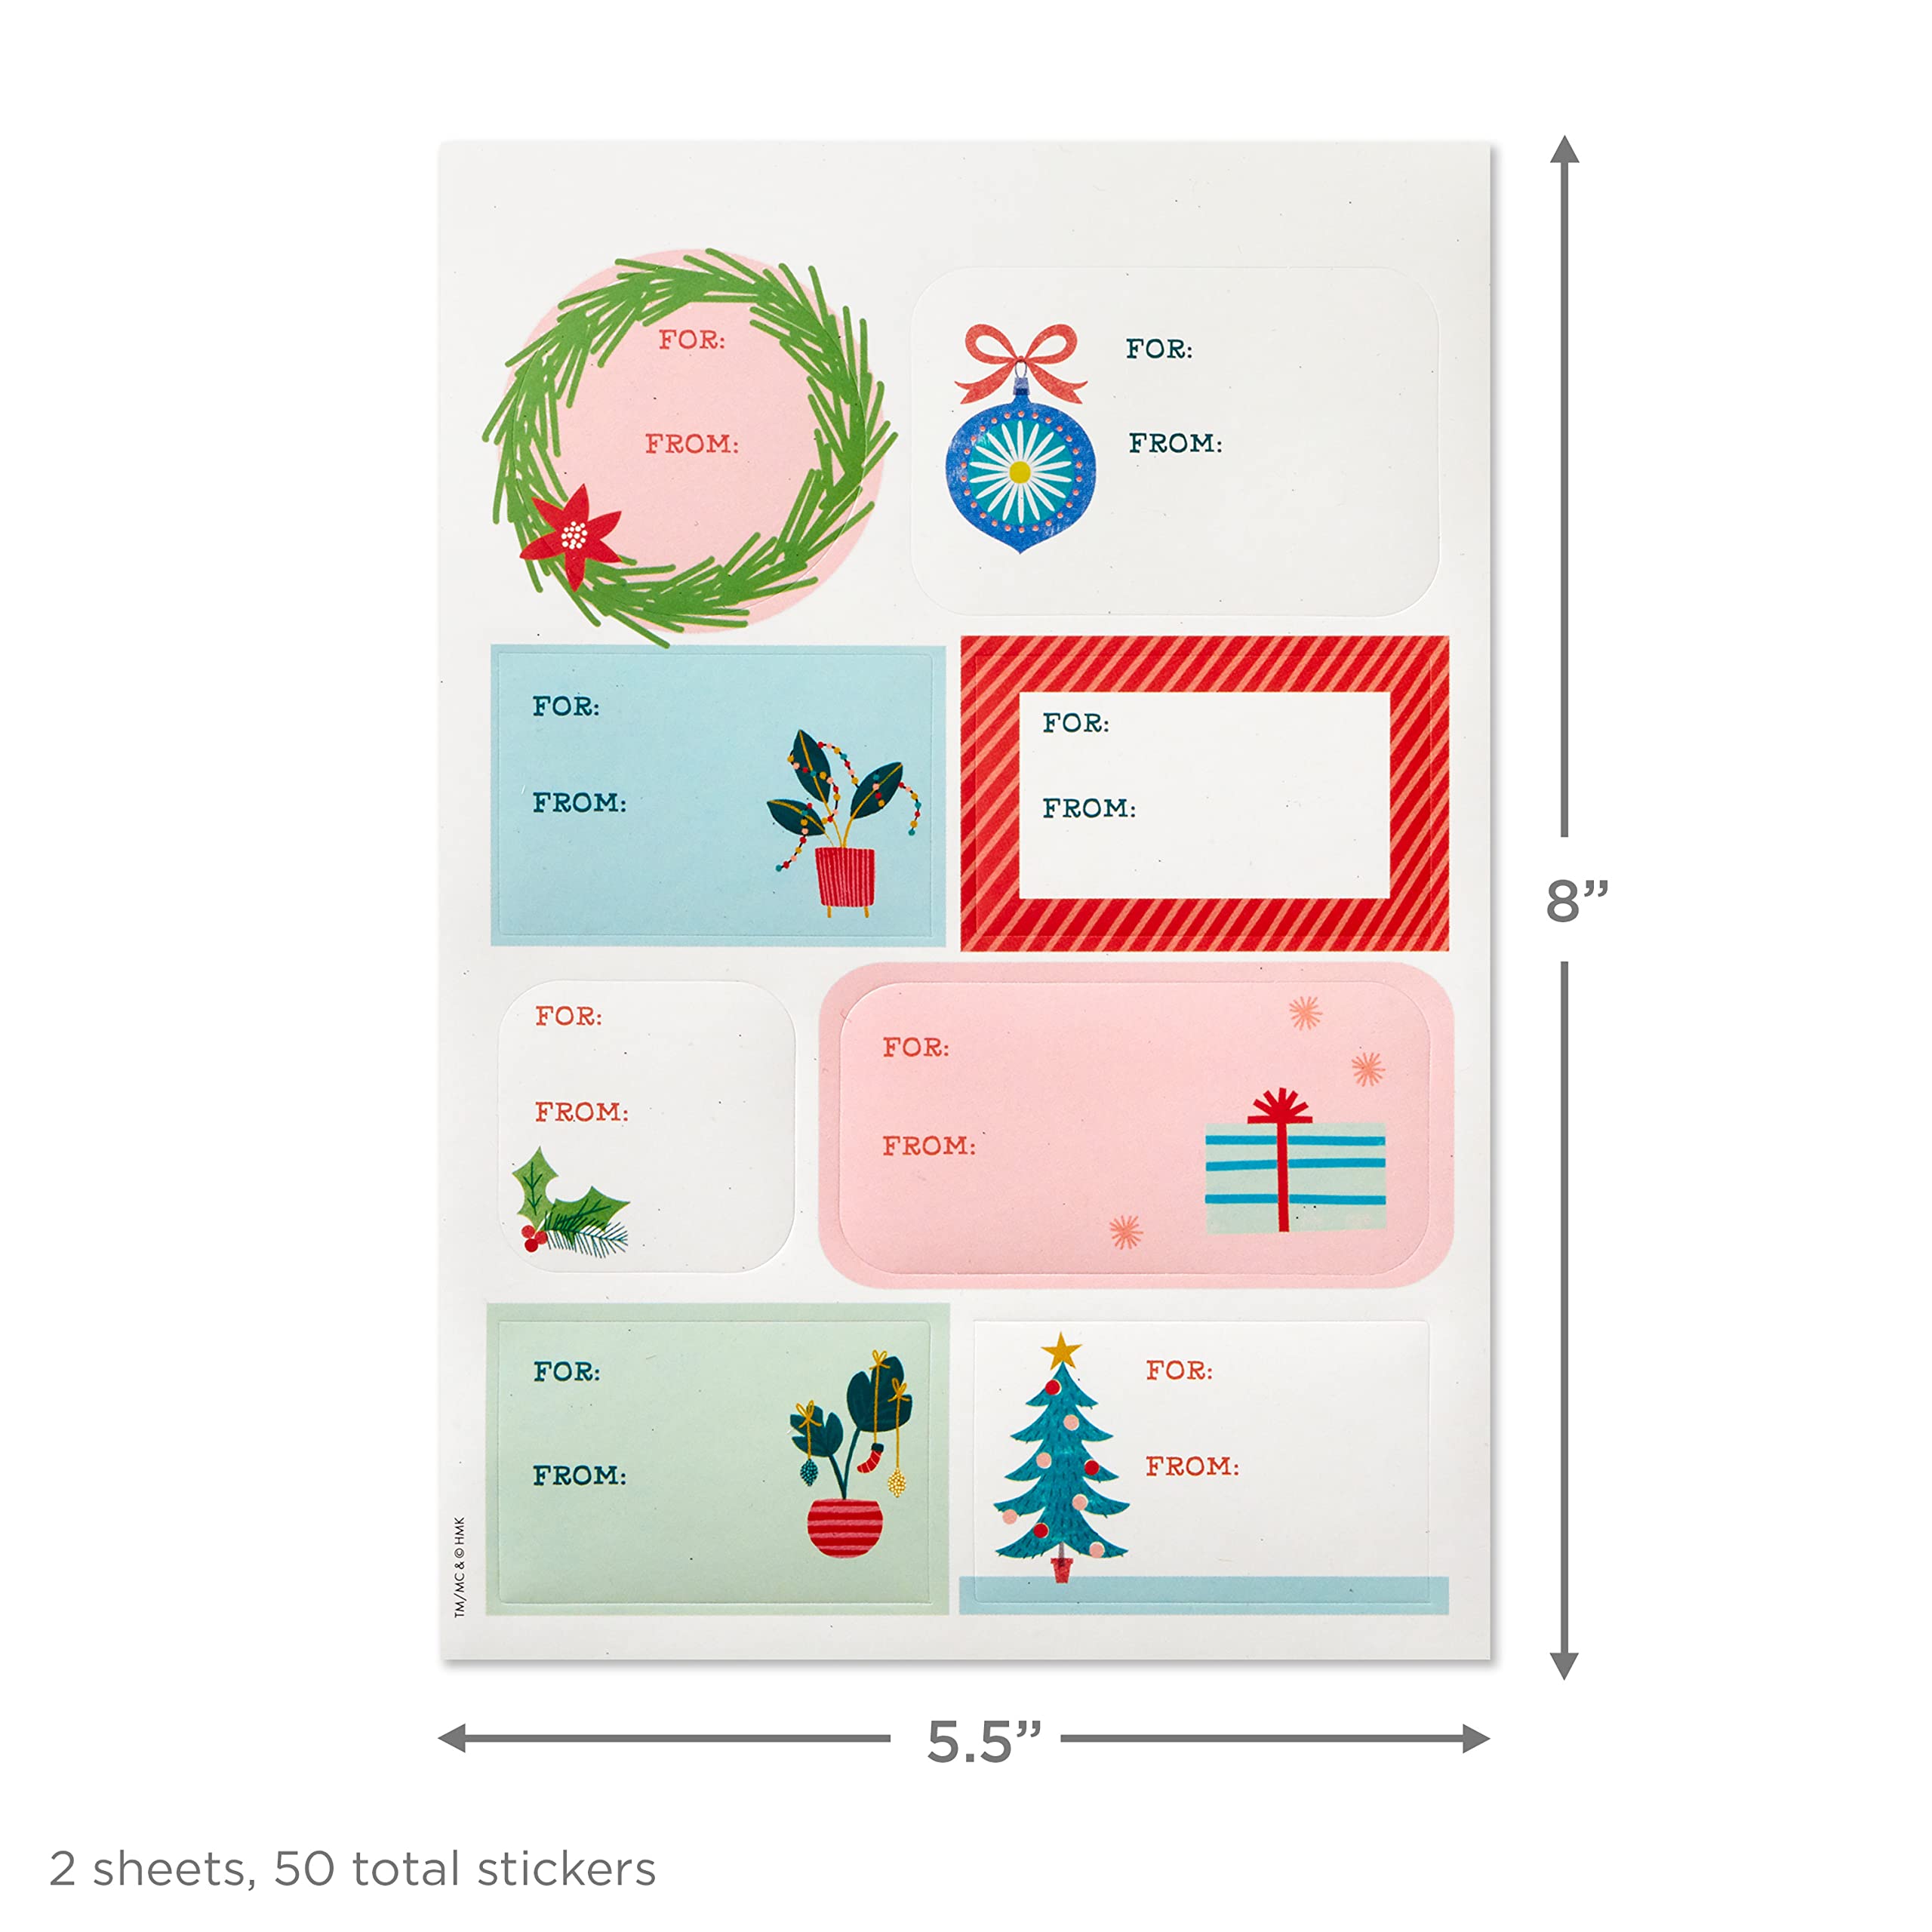 Hallmark Cute Christmas Flat Wrapping Paper Sheets with Cutlines on Reverse (12 Folded Sheets with Sticker Gift Tags) Pink, Mint Green, Plants, Cactus, Presents, Ornaments